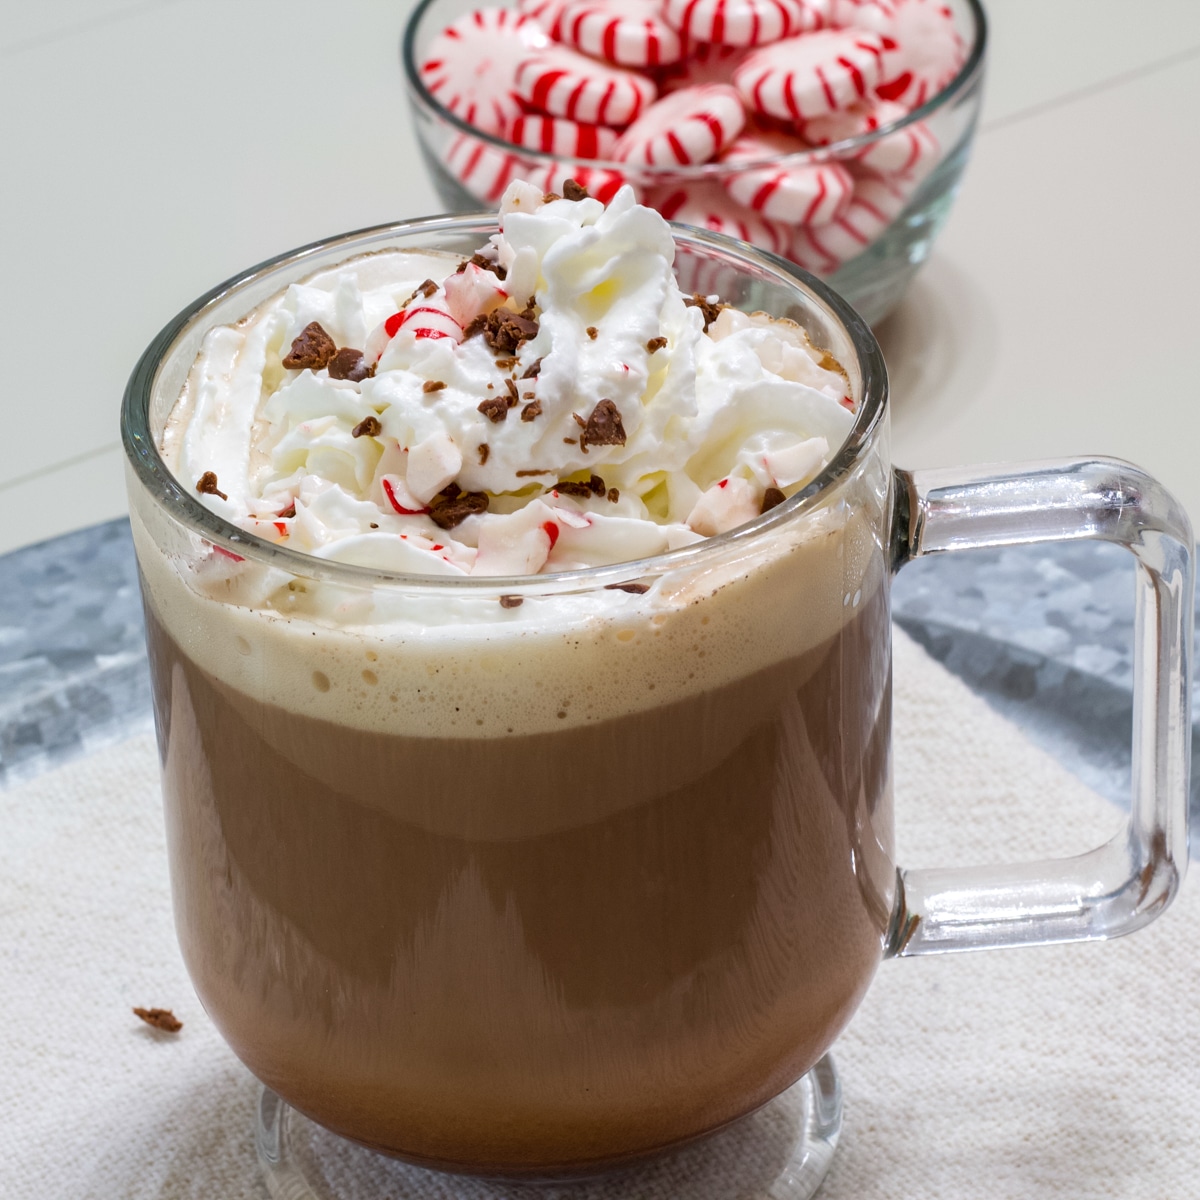 How to Make Peppermint Mocha at Home: An Easy Recipe